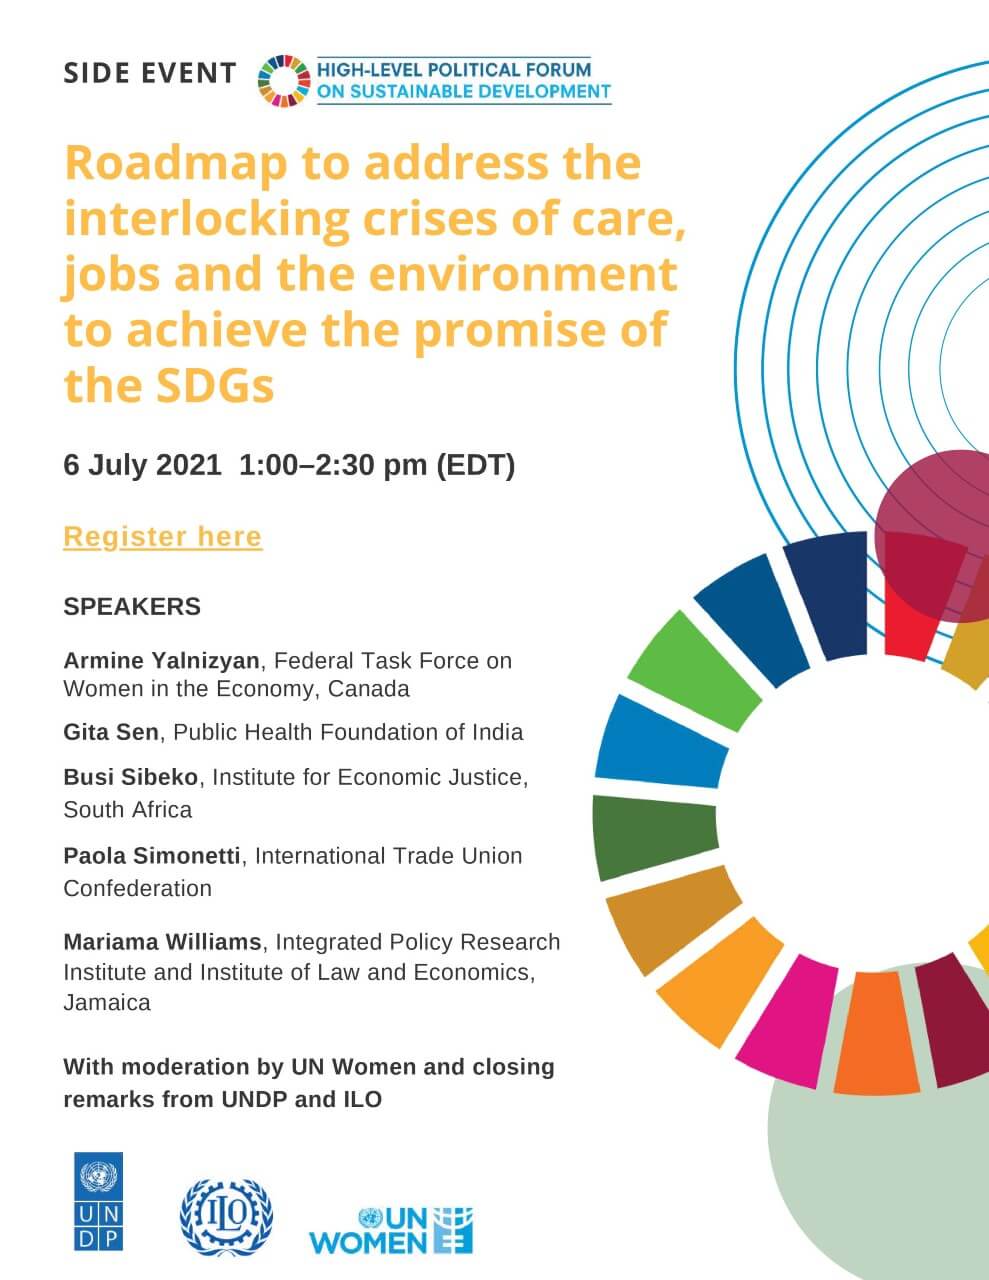 Roadmap to address the interlocking crises of care, jobs, and the environment to achieve the promise of the SDGs